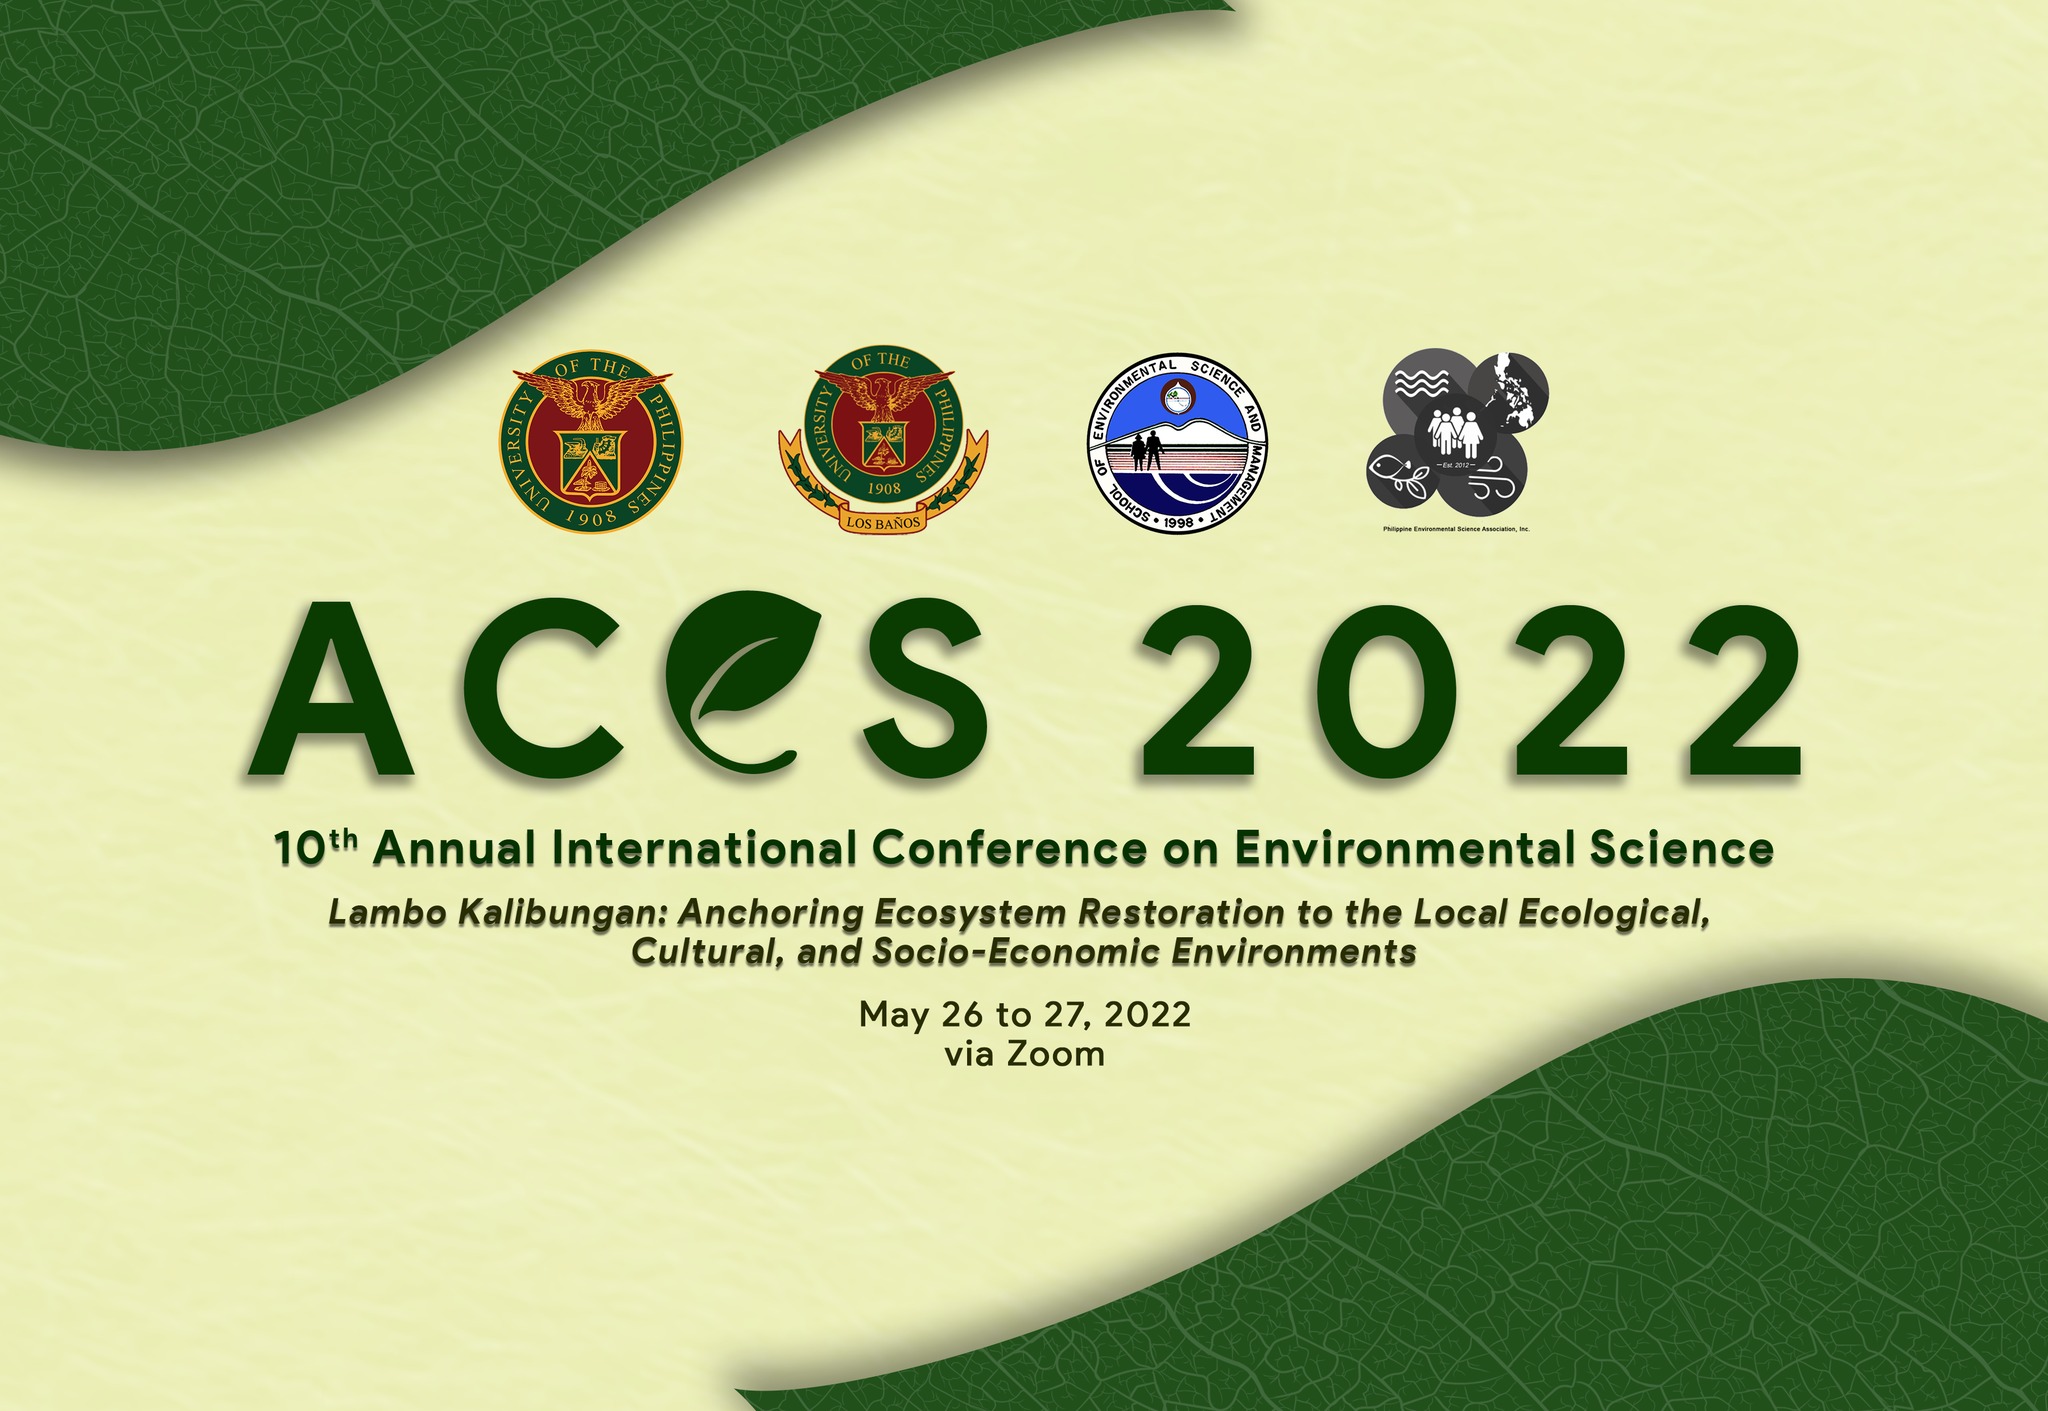 UPLB-SESAM joins the 10th Annual International Conference on Environmental Science